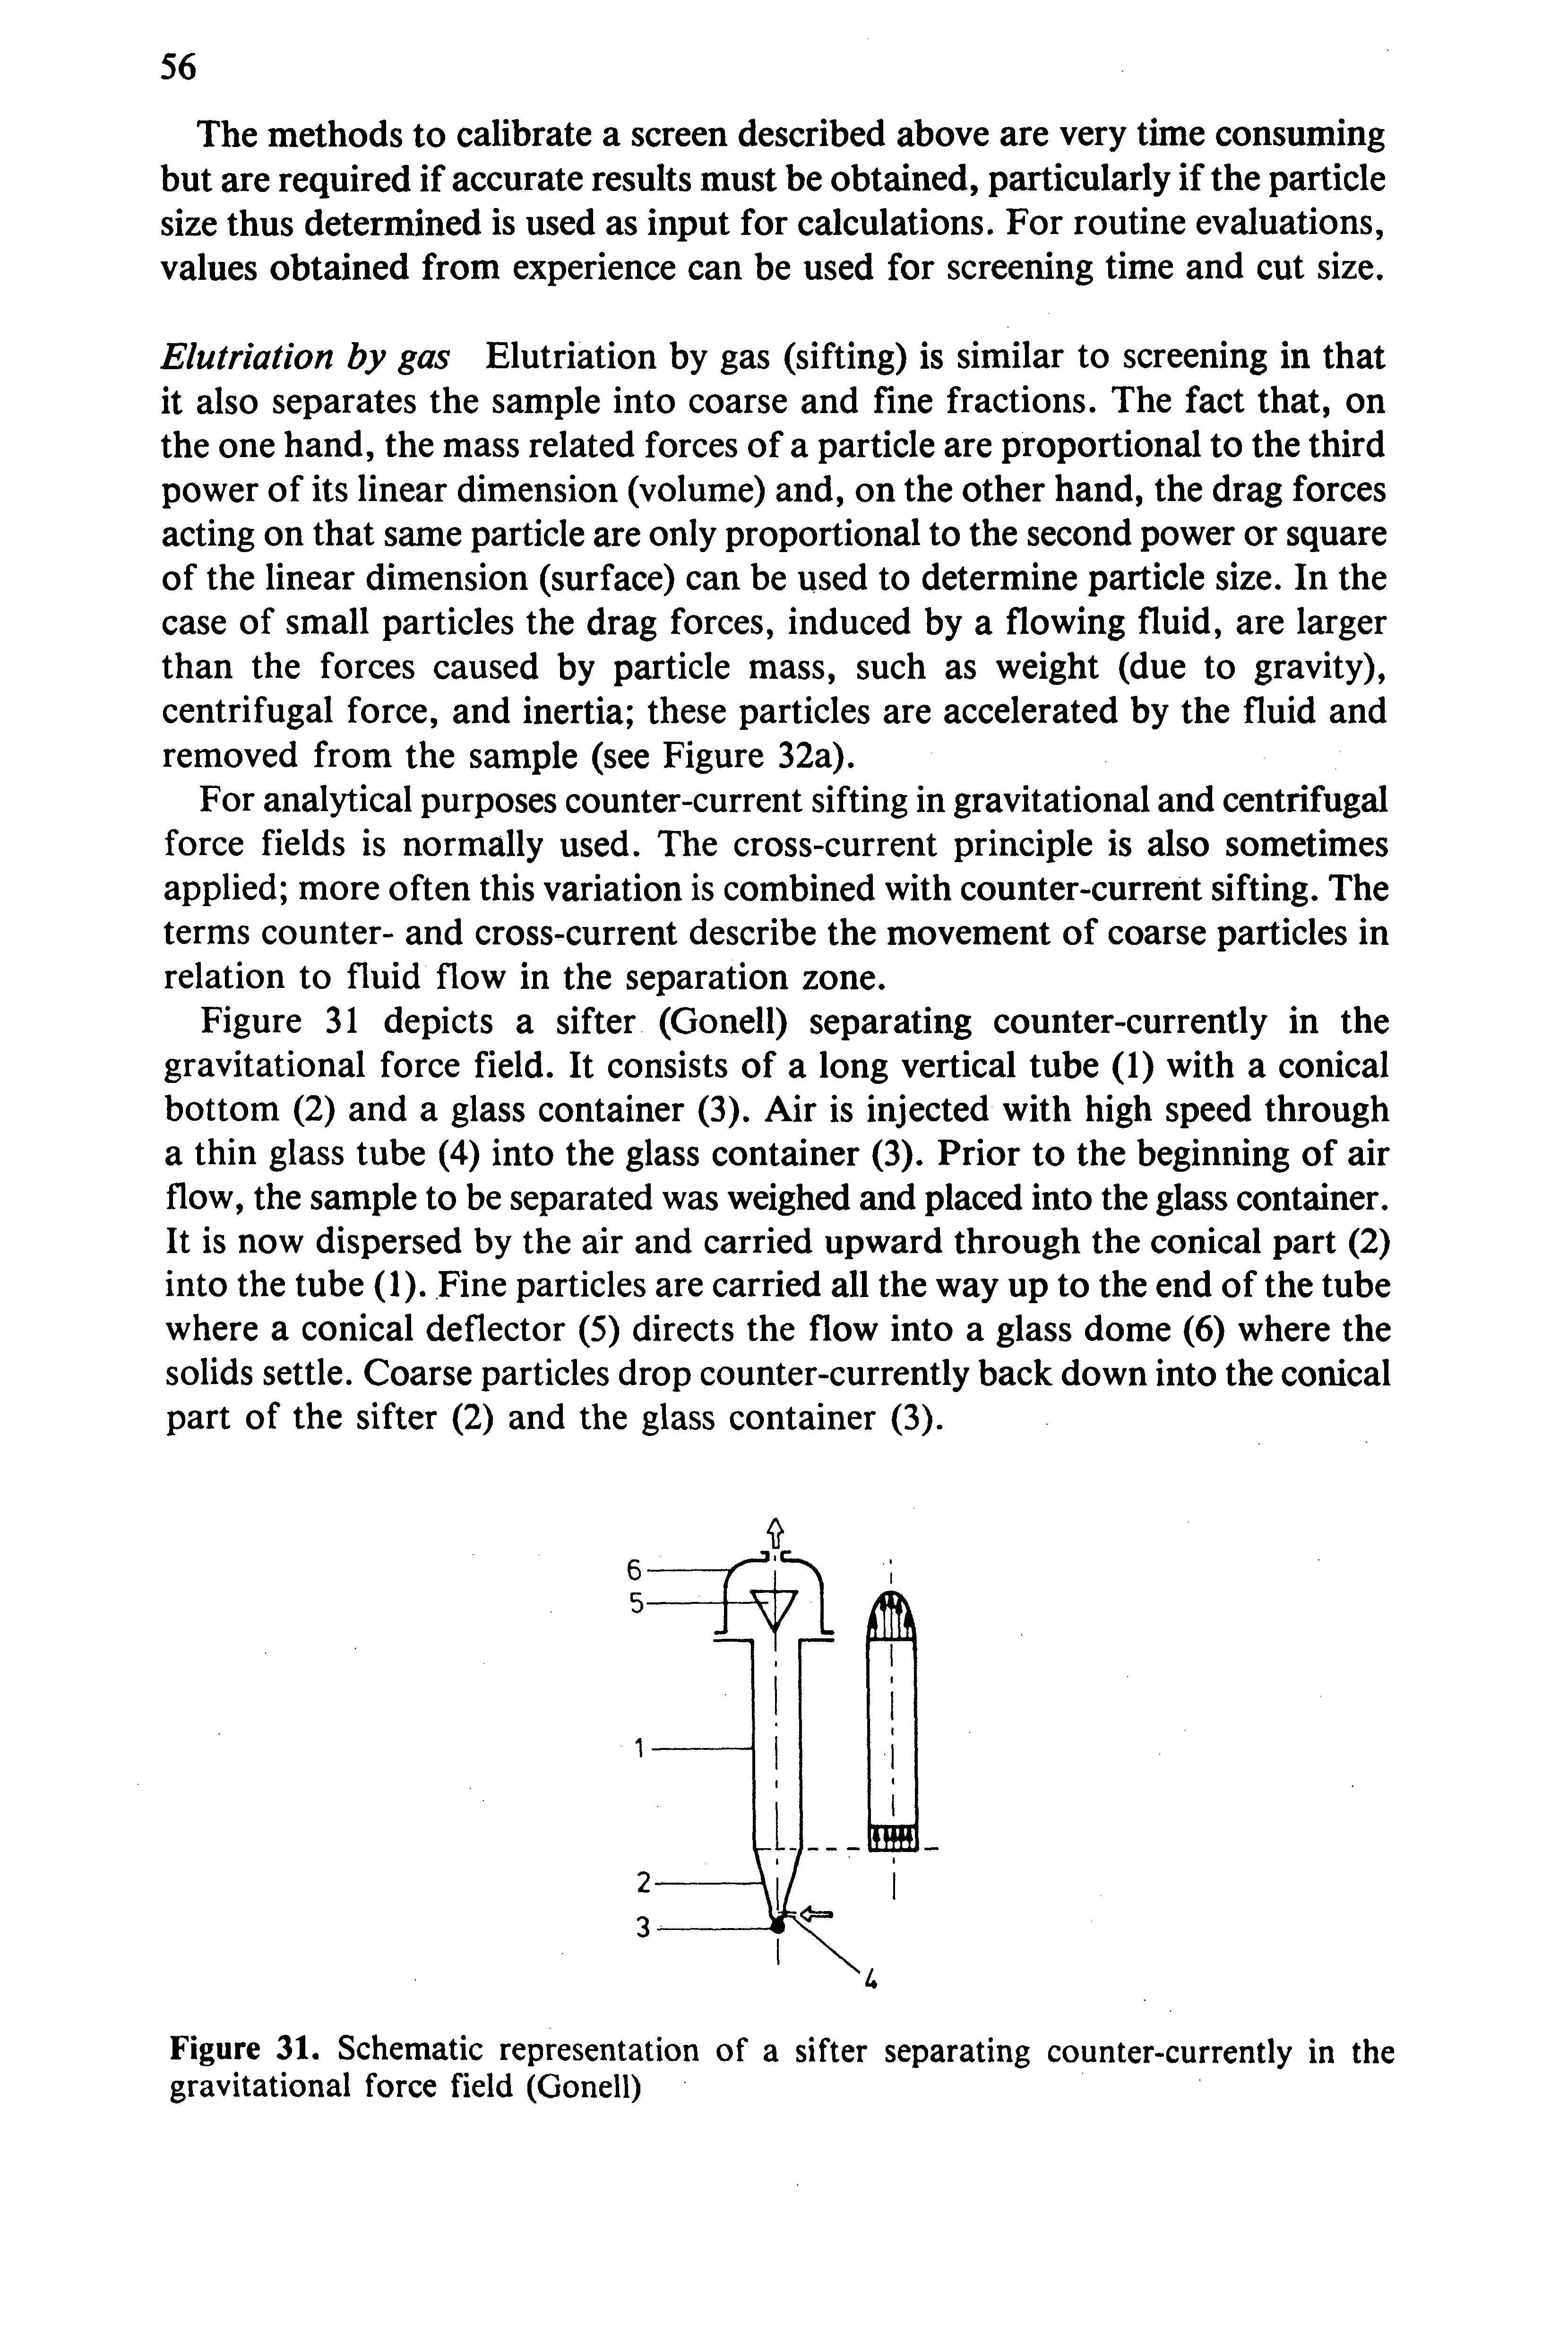 Figure 31. Schematic representation of a sifter separating counter-currently in the gravitational force field (Gonell)...